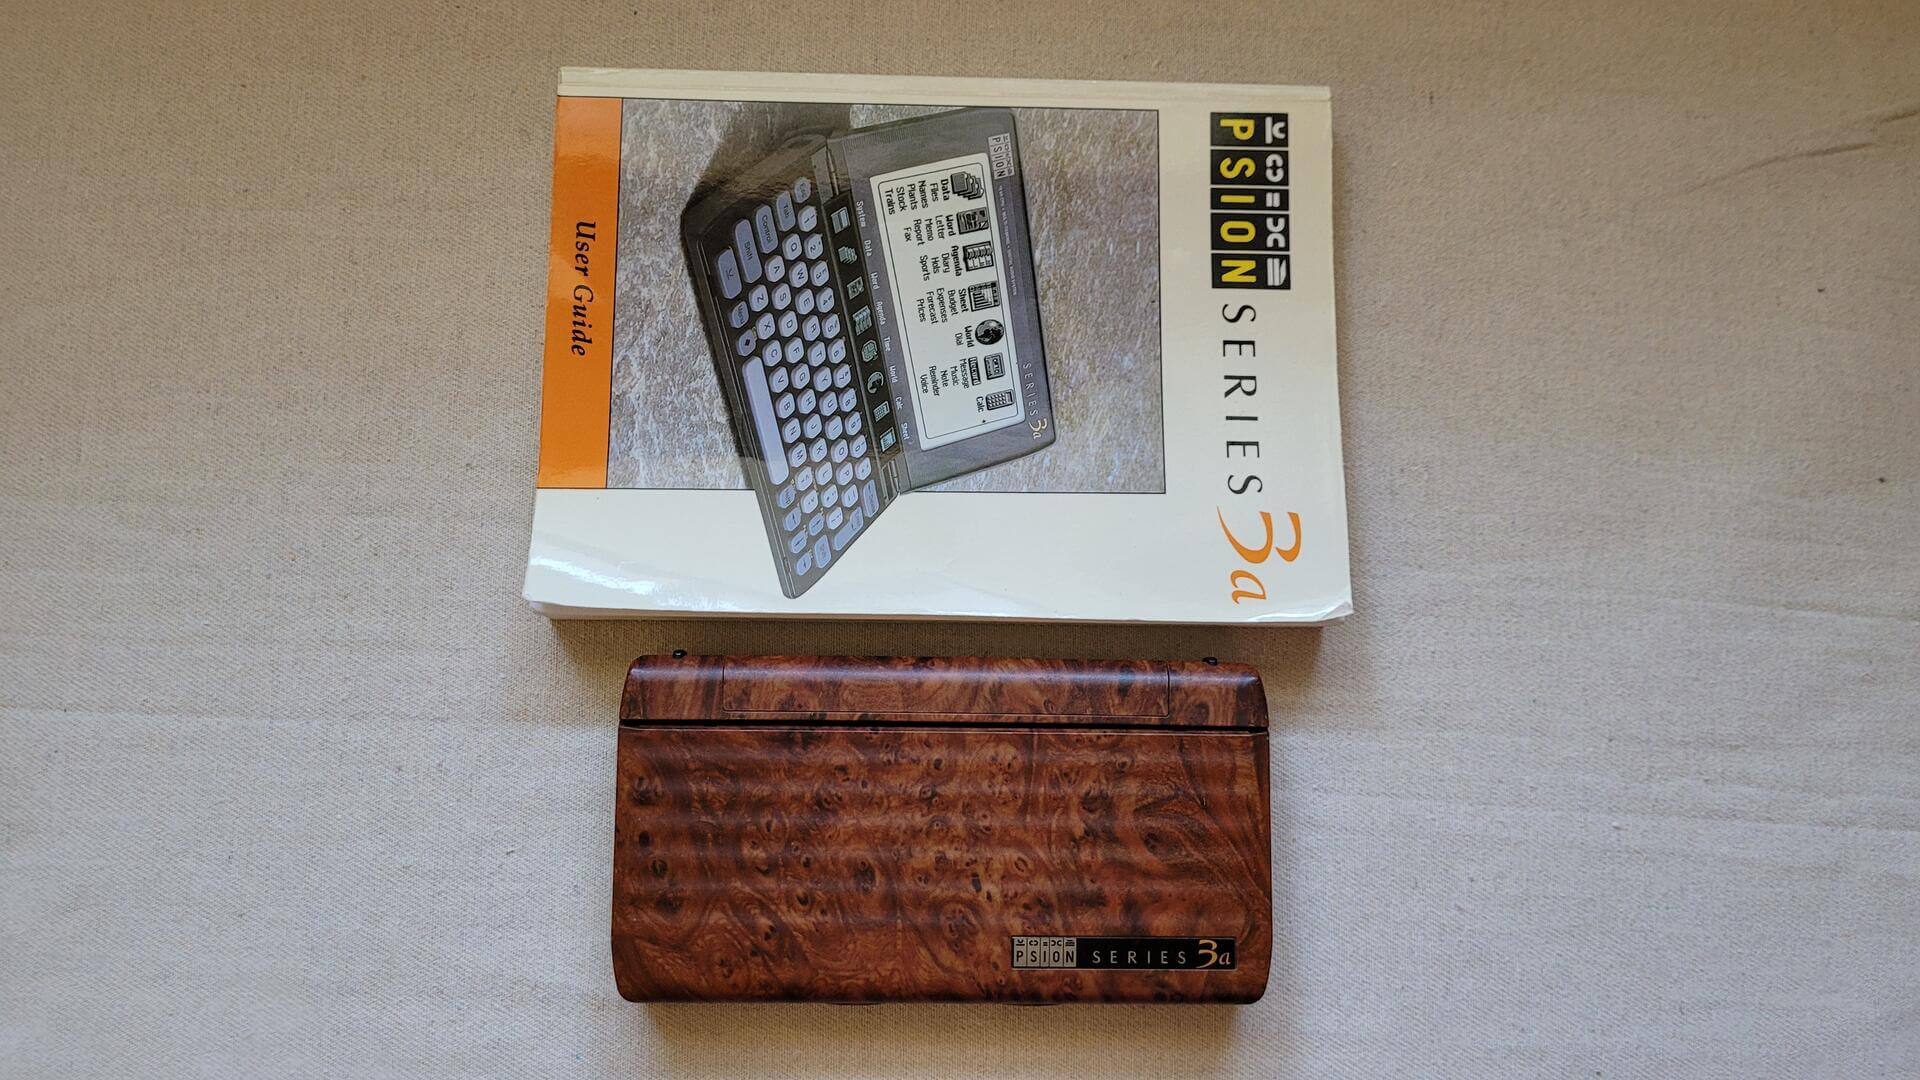 Rare Retro Walnut PSION 3A PDA w Owner's Manual Made in UK - Vintage collectible electronic gadget and handheld computers